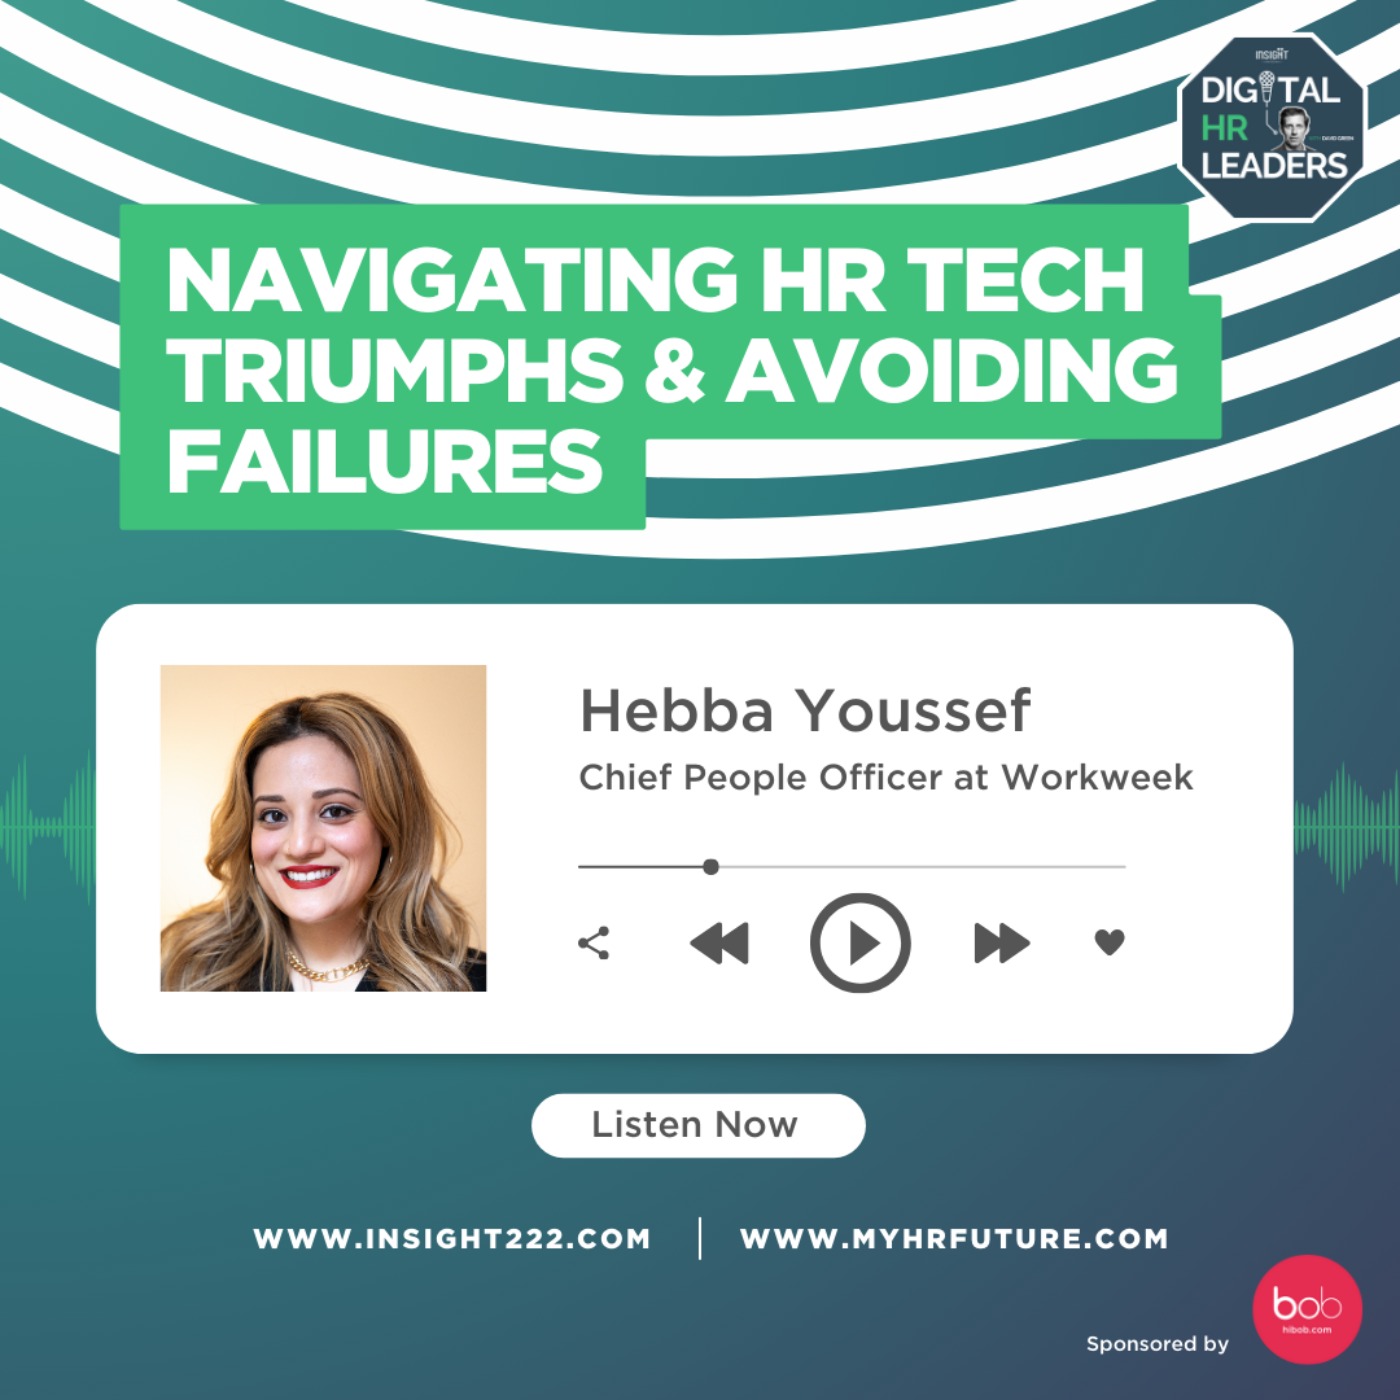 Navigating HR Tech Triumphs & Avoiding Failures (an Interview with Hebba Youssef)